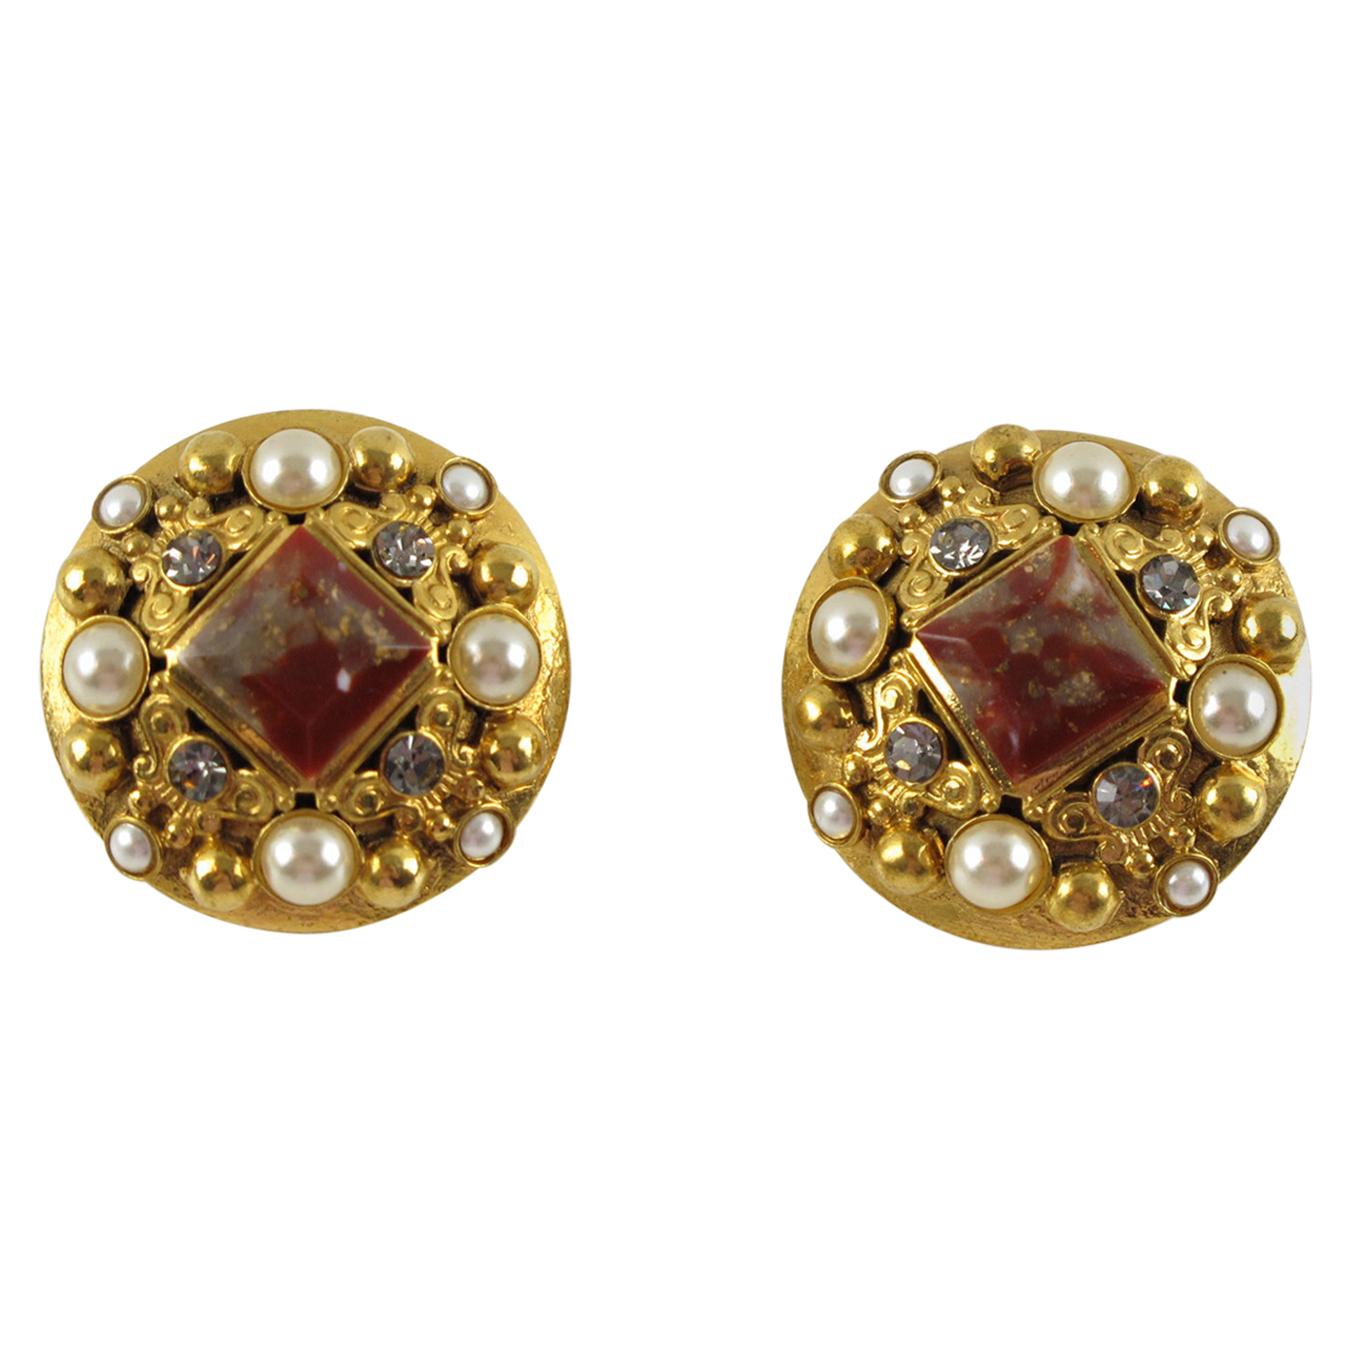 Henry Perichon Gilt Metal Jeweled Clip Earrings